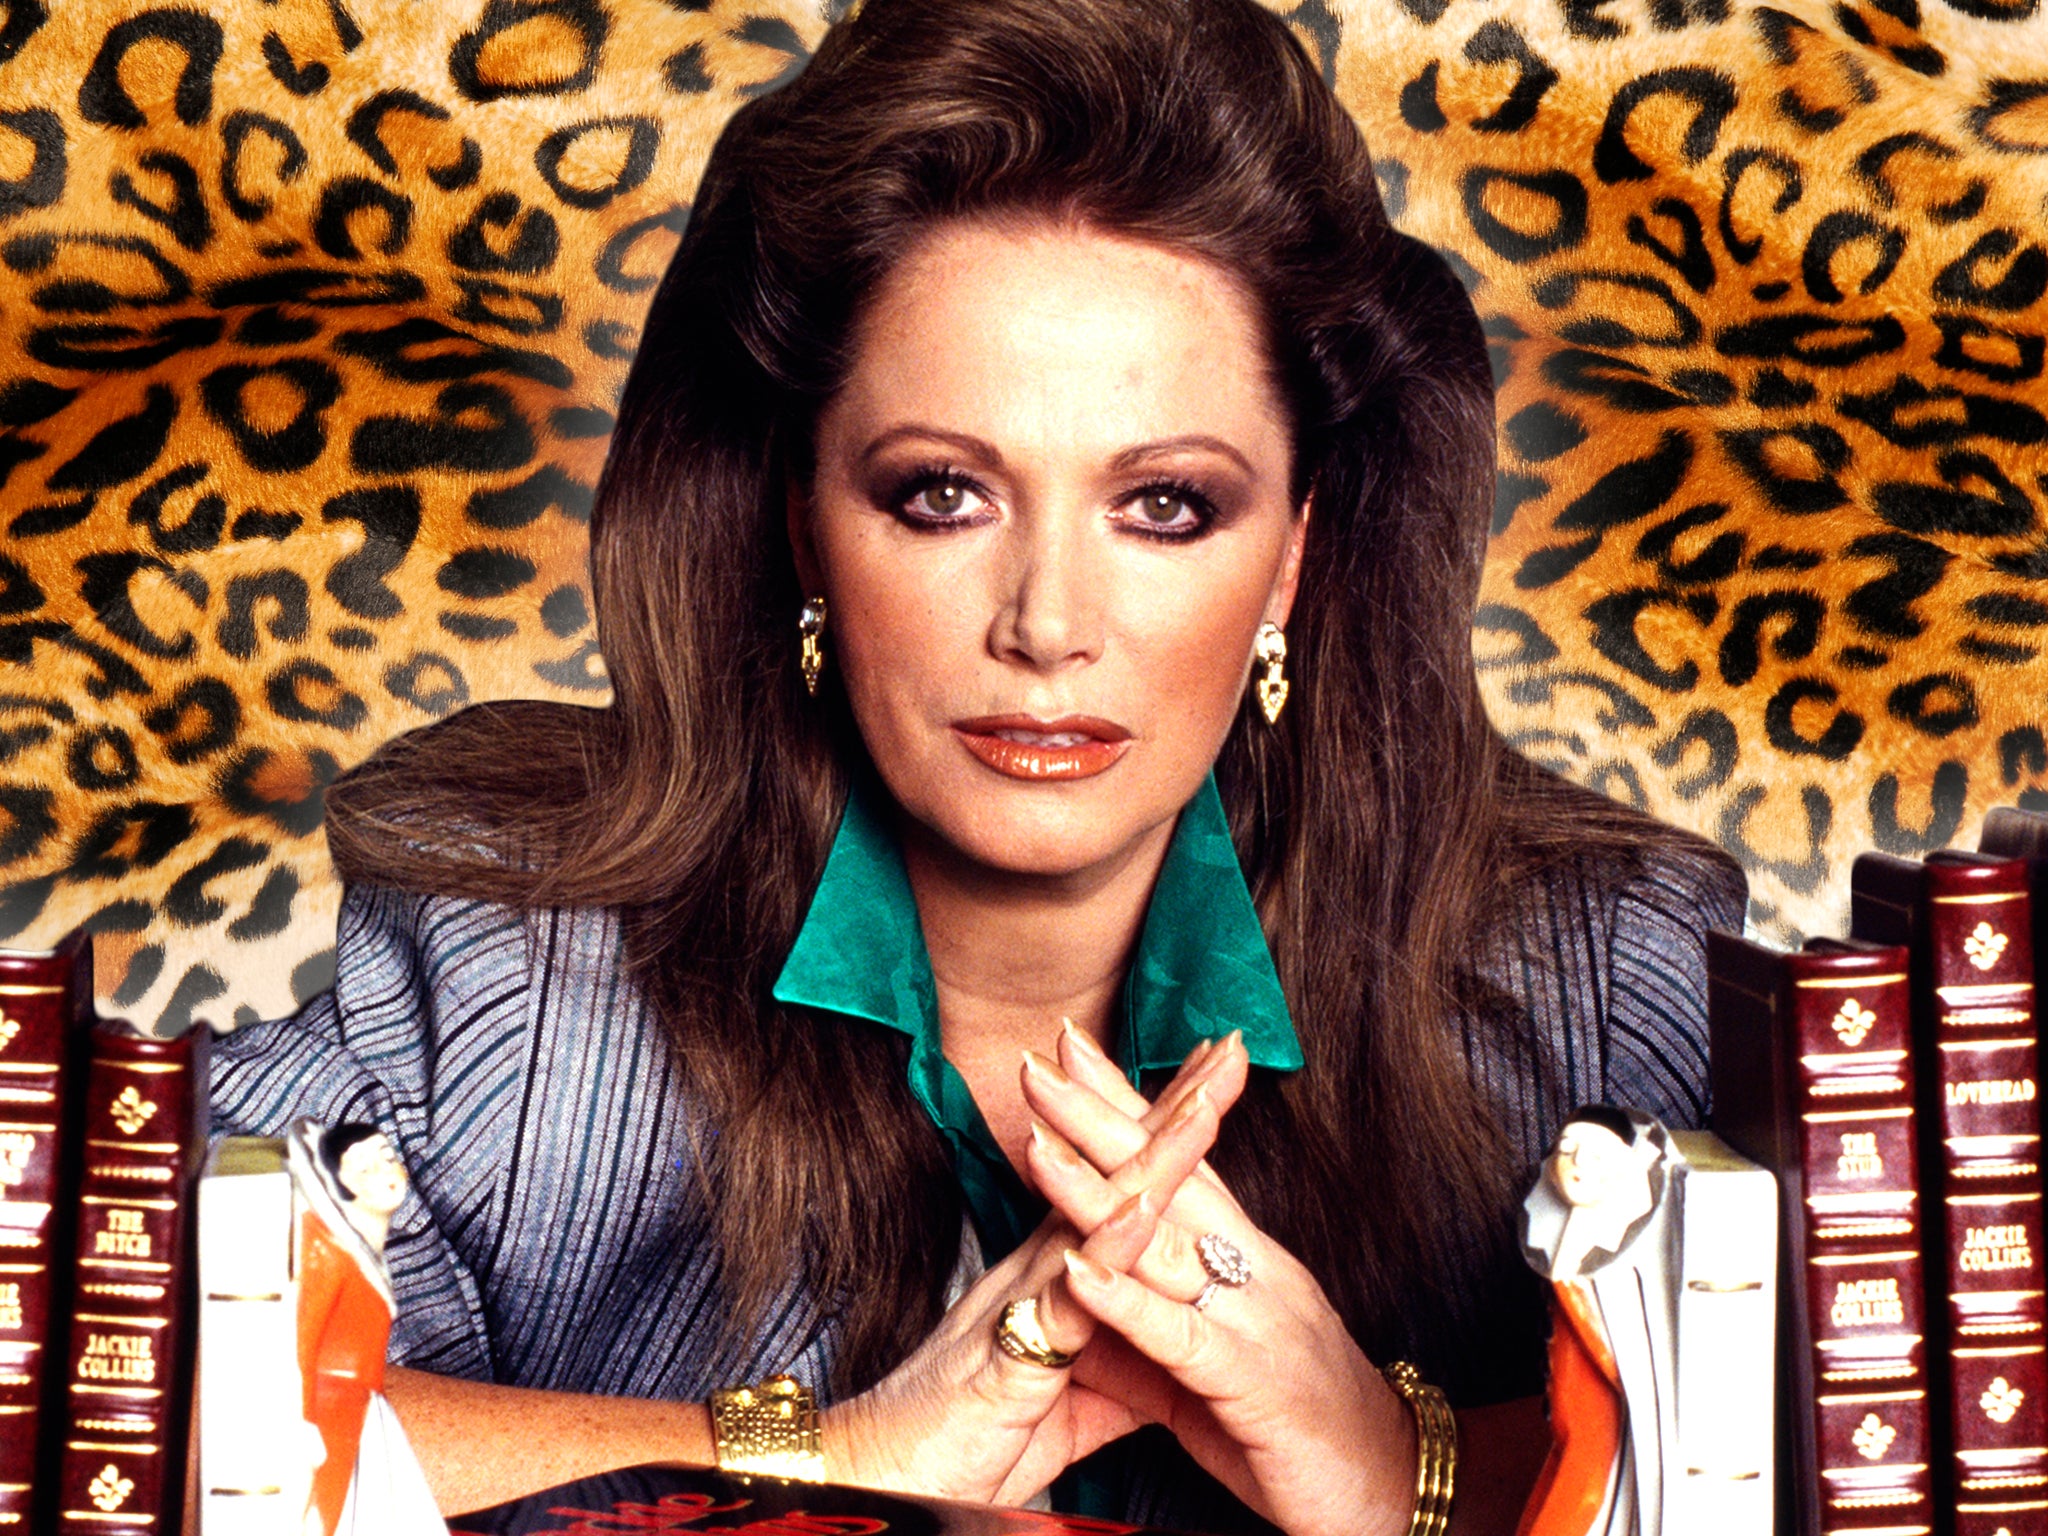 A sexed-up cartoon character whose talk-show interviews were as sought after as her manuscripts: Jackie Collins in 1998